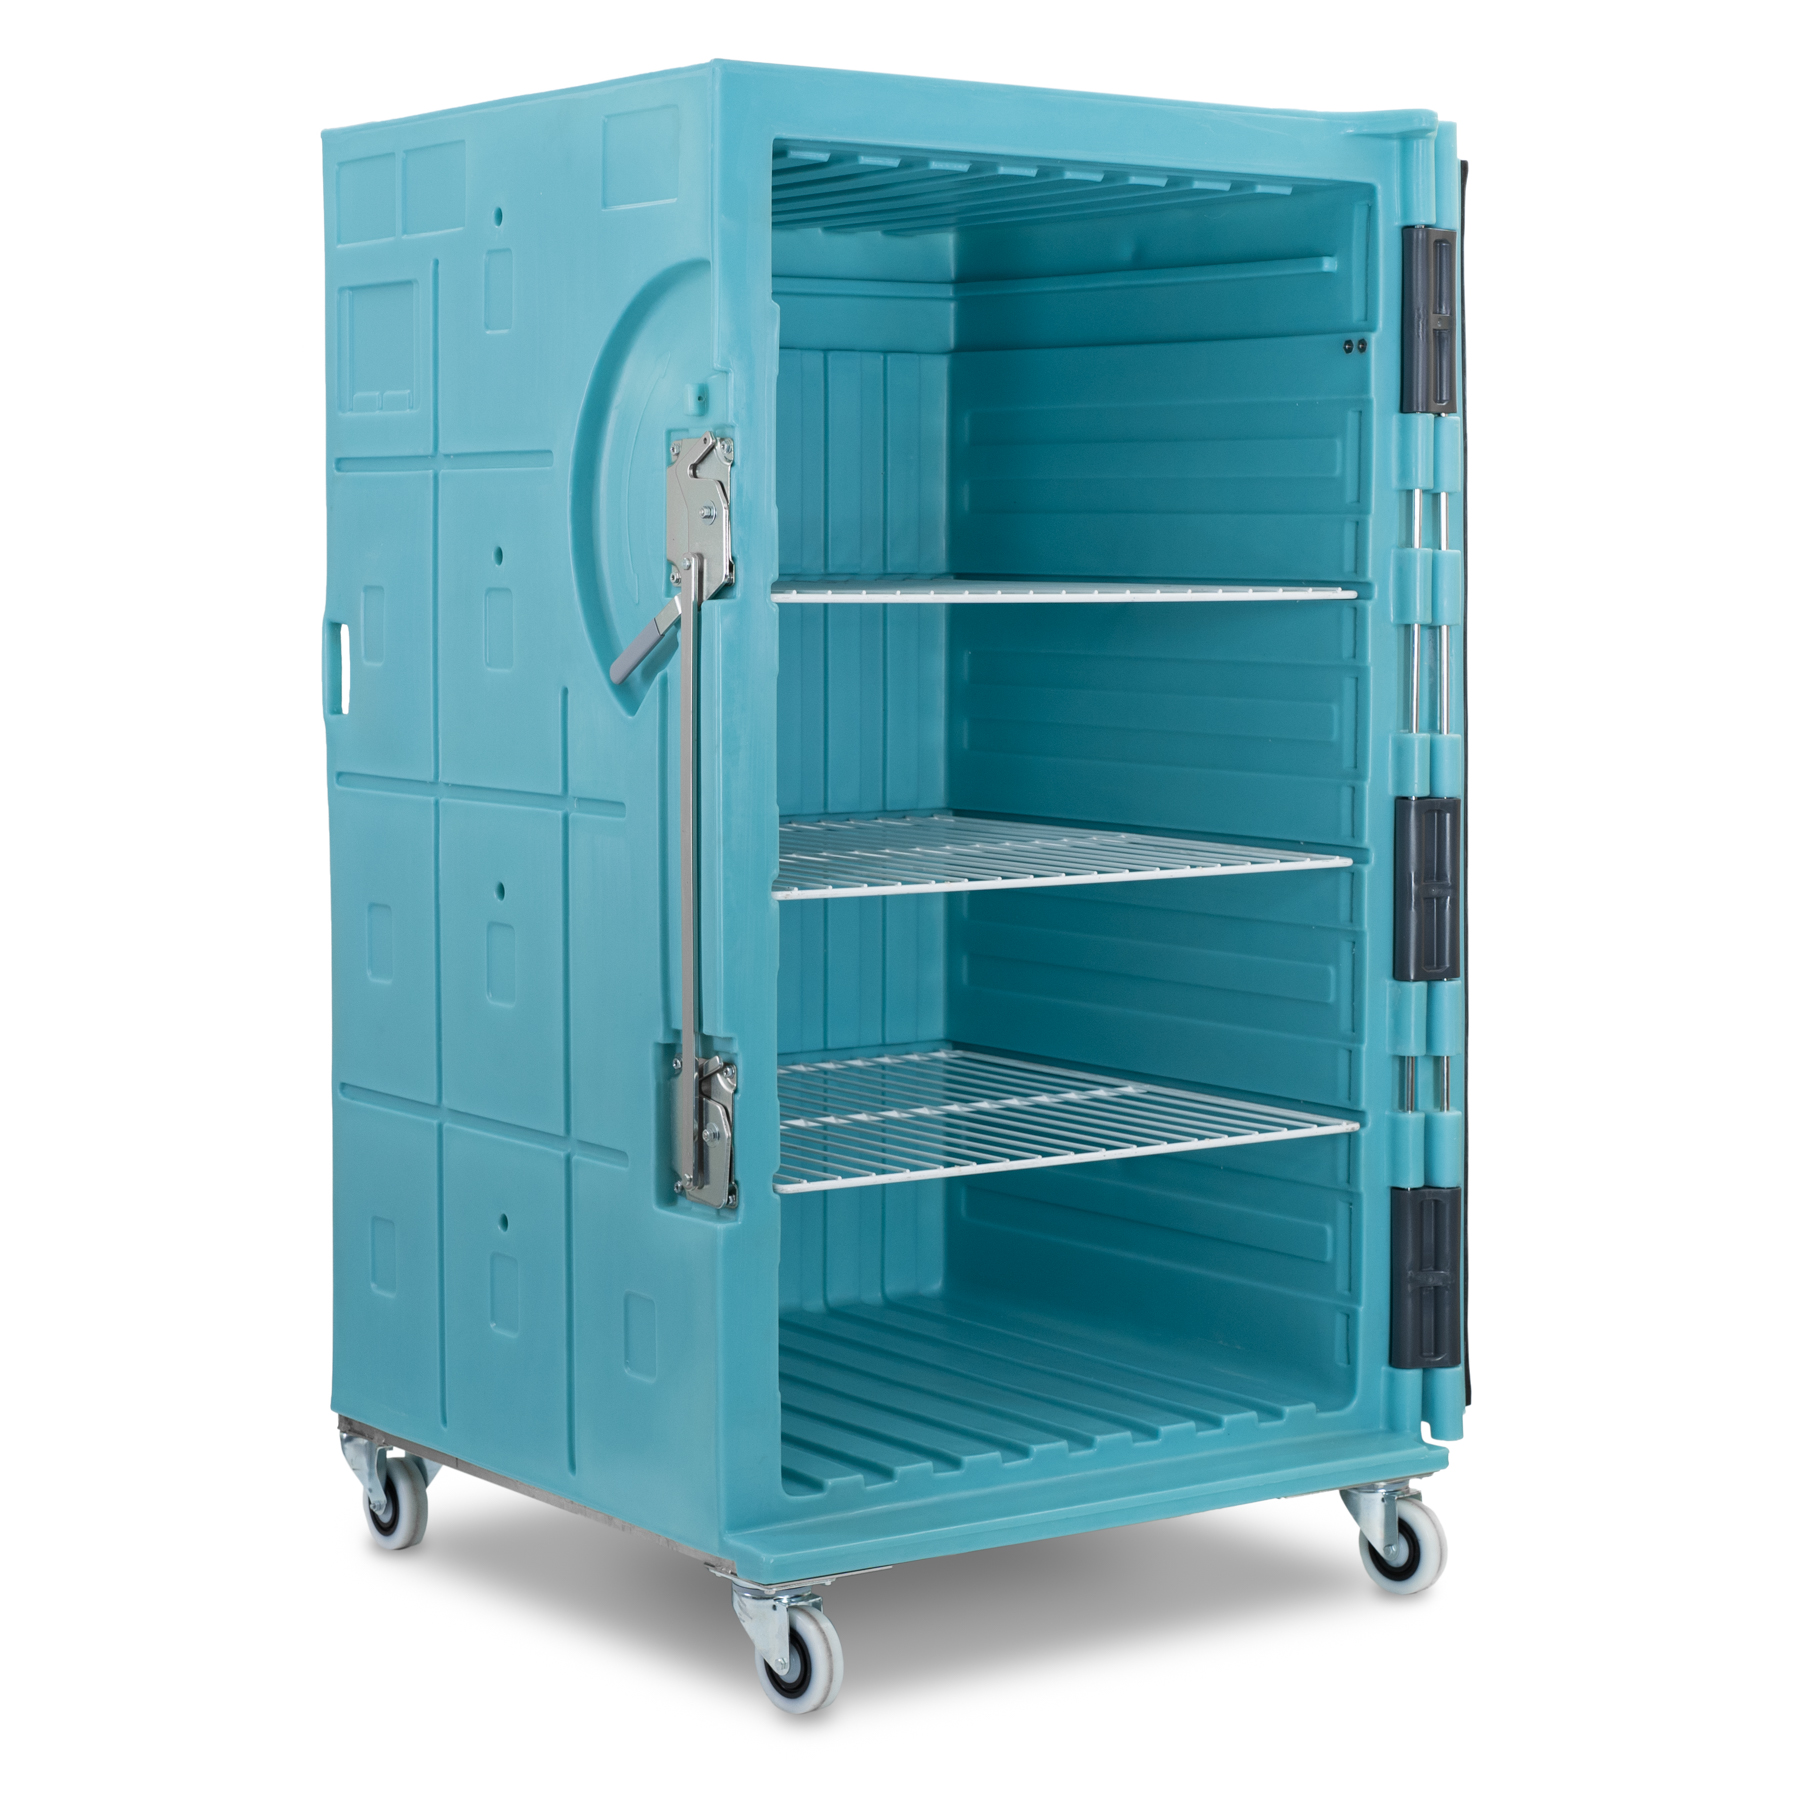 INSULATED ROLL 1300 OLIVO MIDDLE SHELF